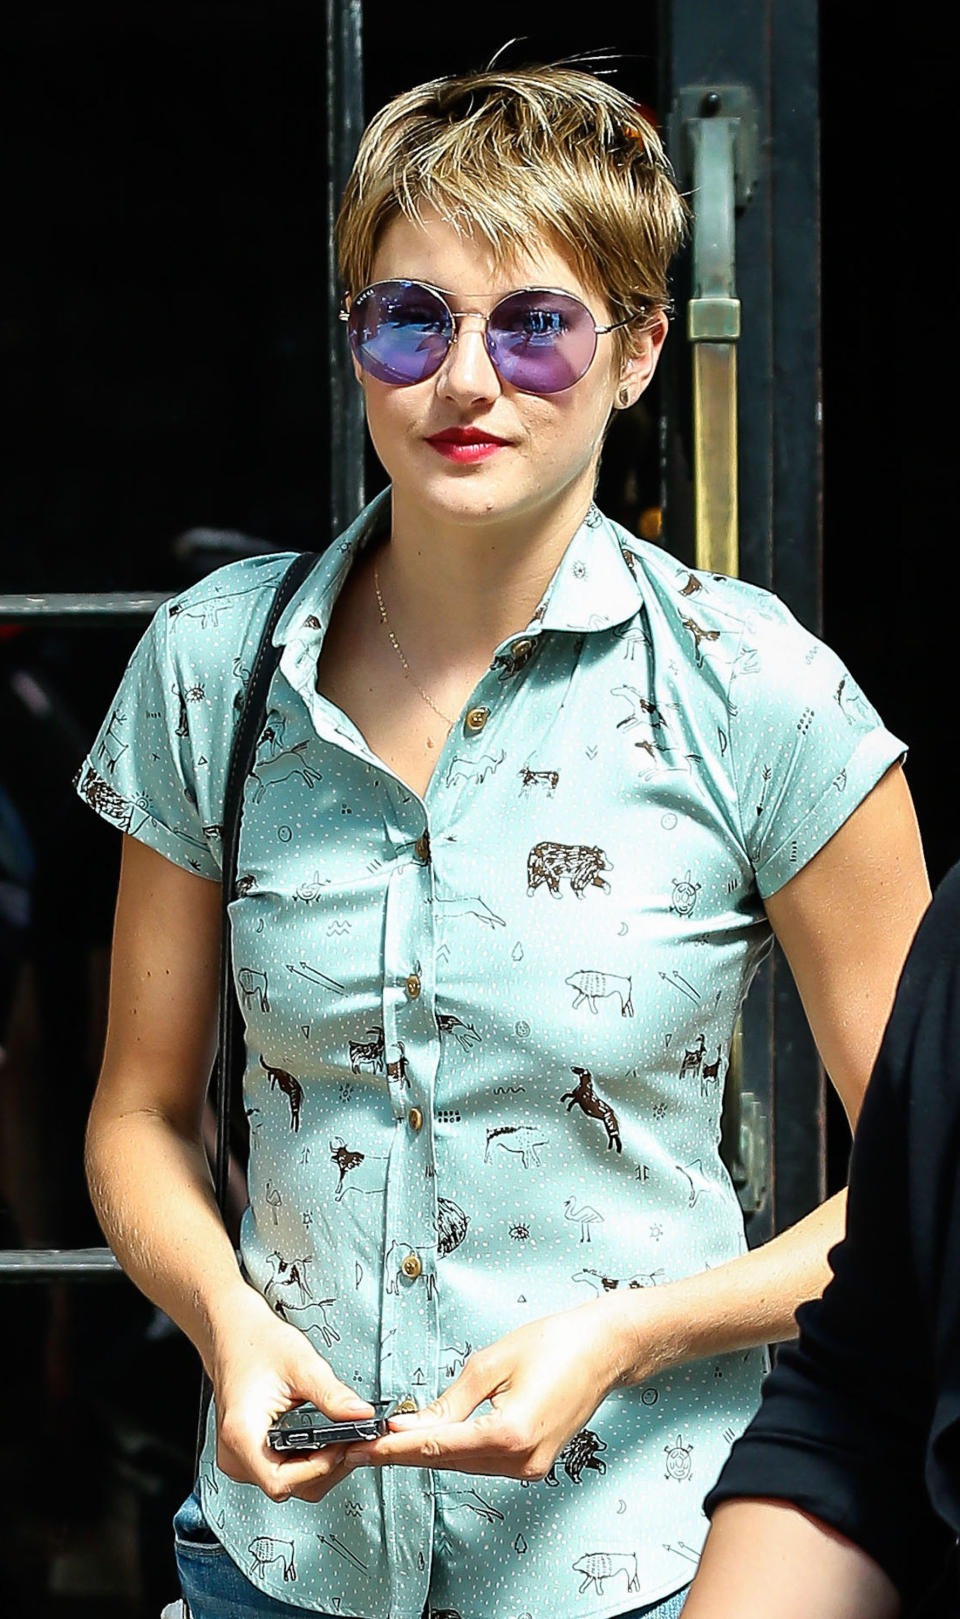 Shailene Woodley was seen leaving the Bowery Hotel in New York City on June 1.